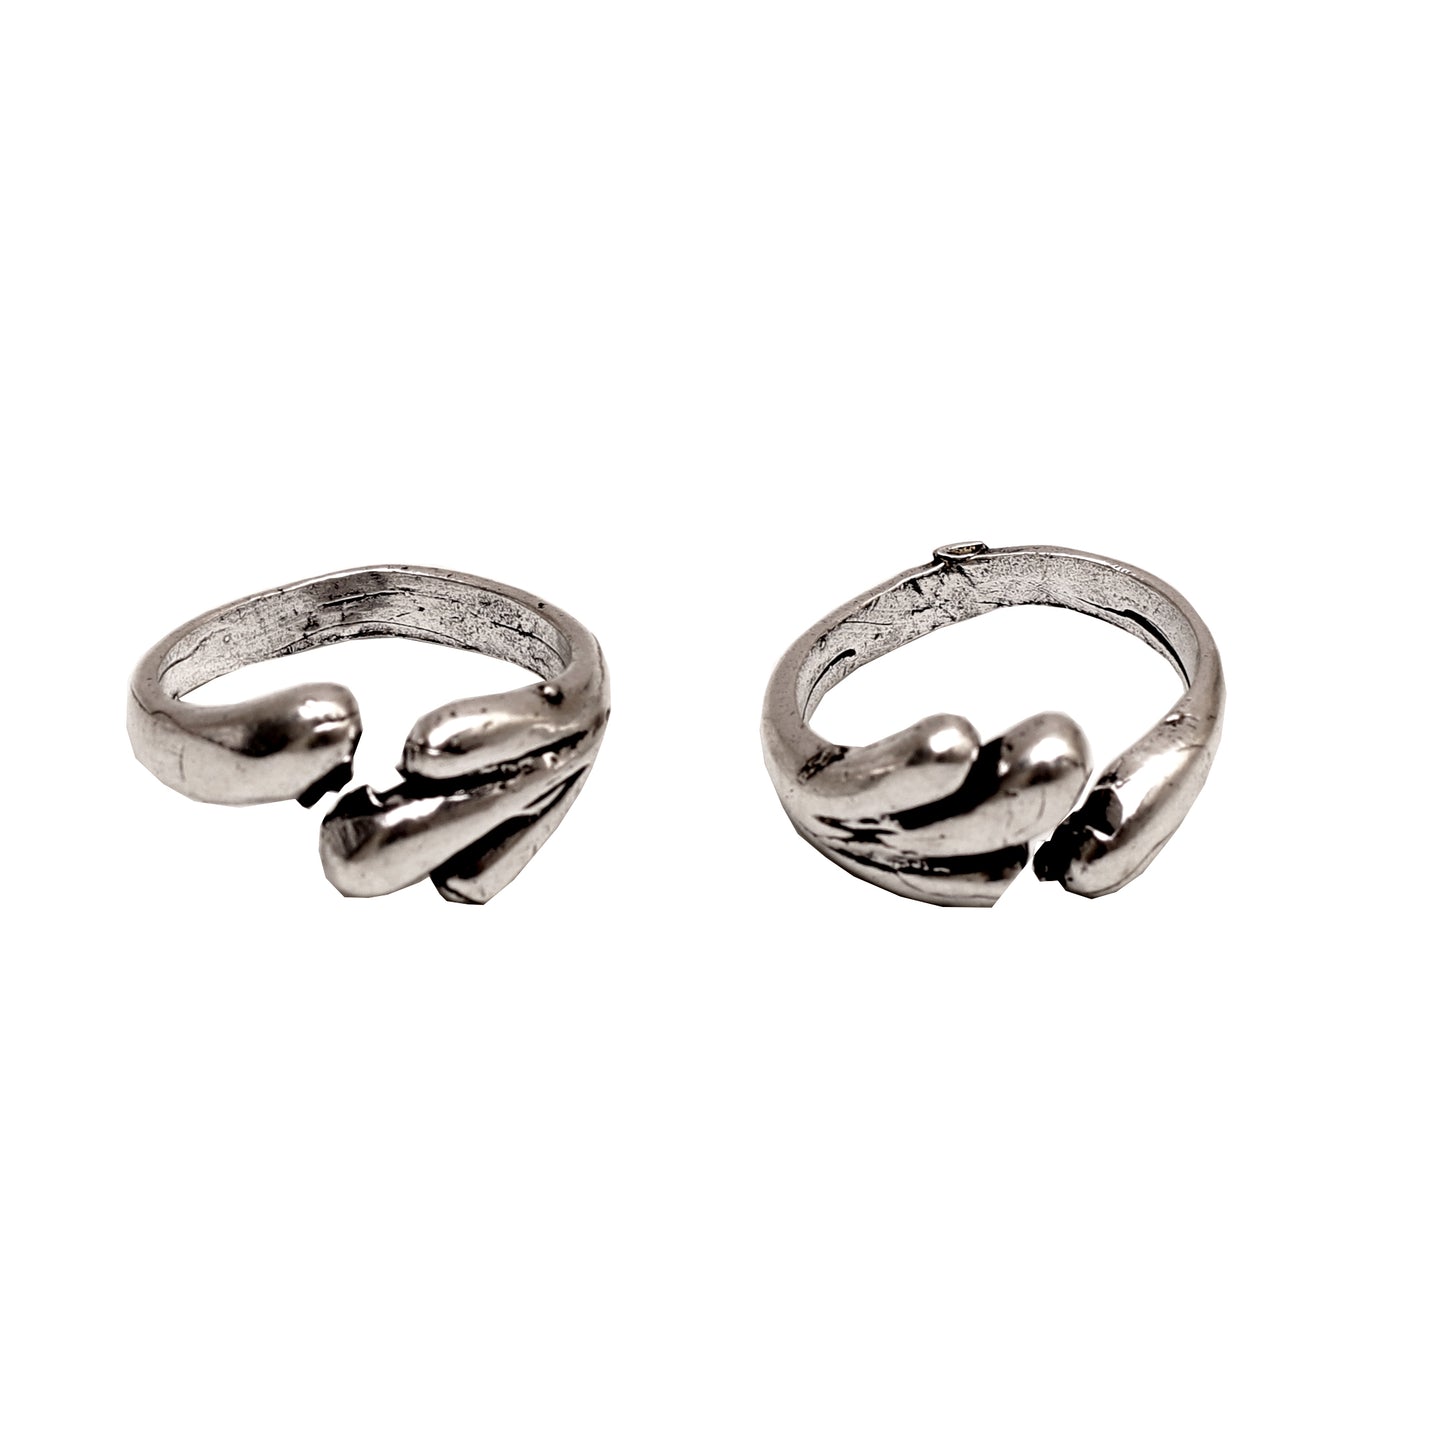 Contemporary Brass Toe Rings (Set of 2)